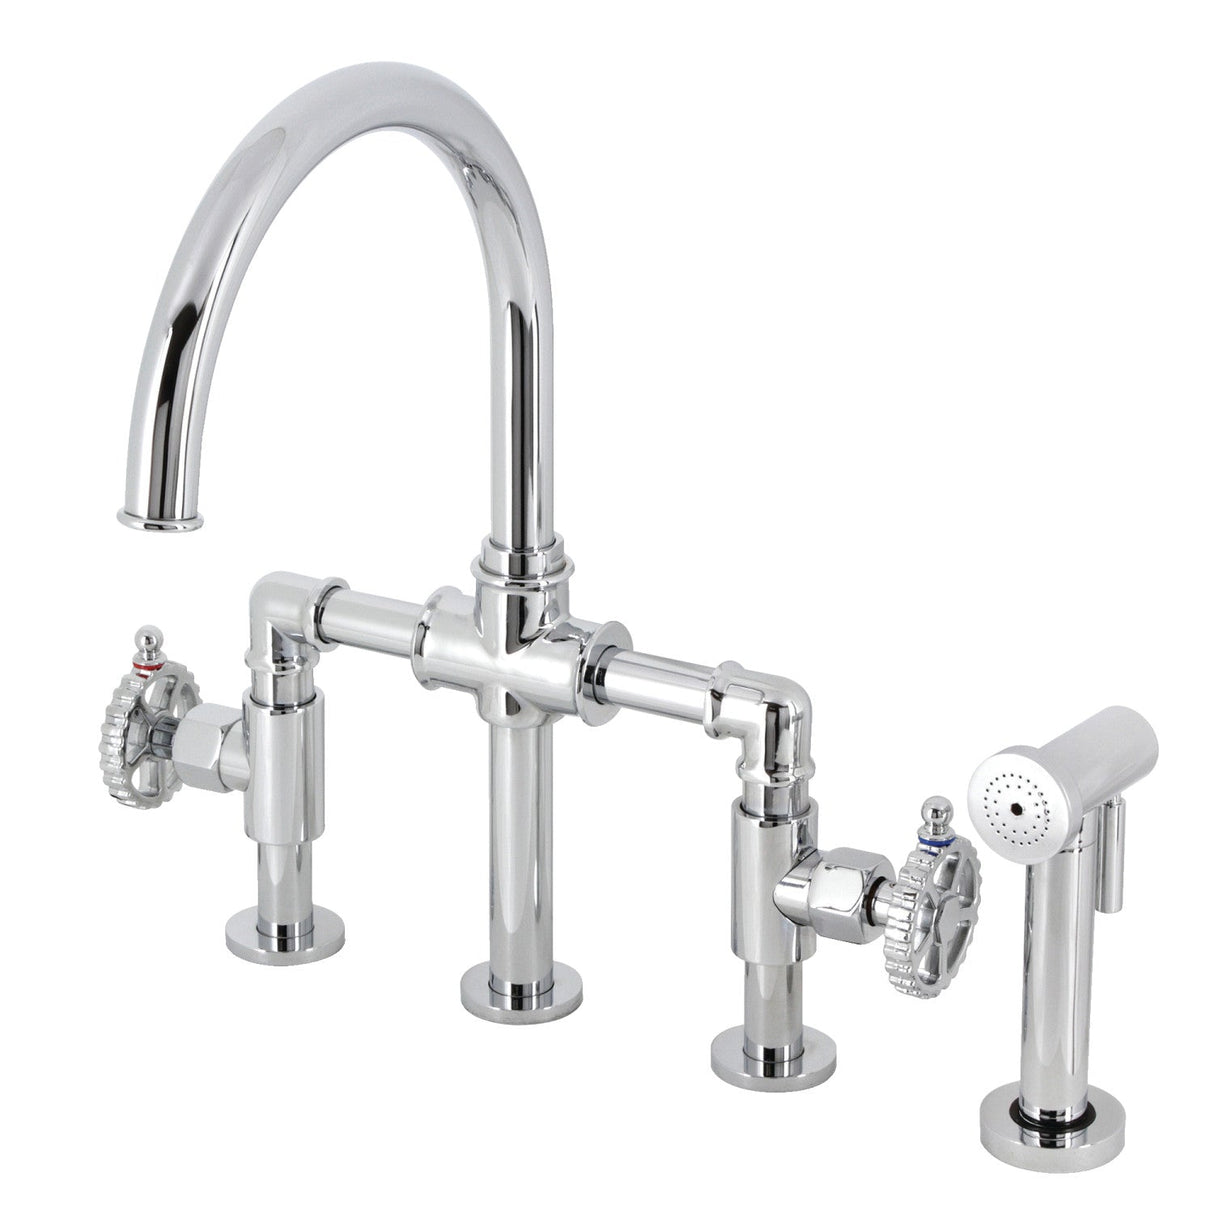 Fuller KS2331CG Two-Handle 4-Hole Deck Mount Bridge Kitchen Faucet with Brass Sprayer, Polished Chrome